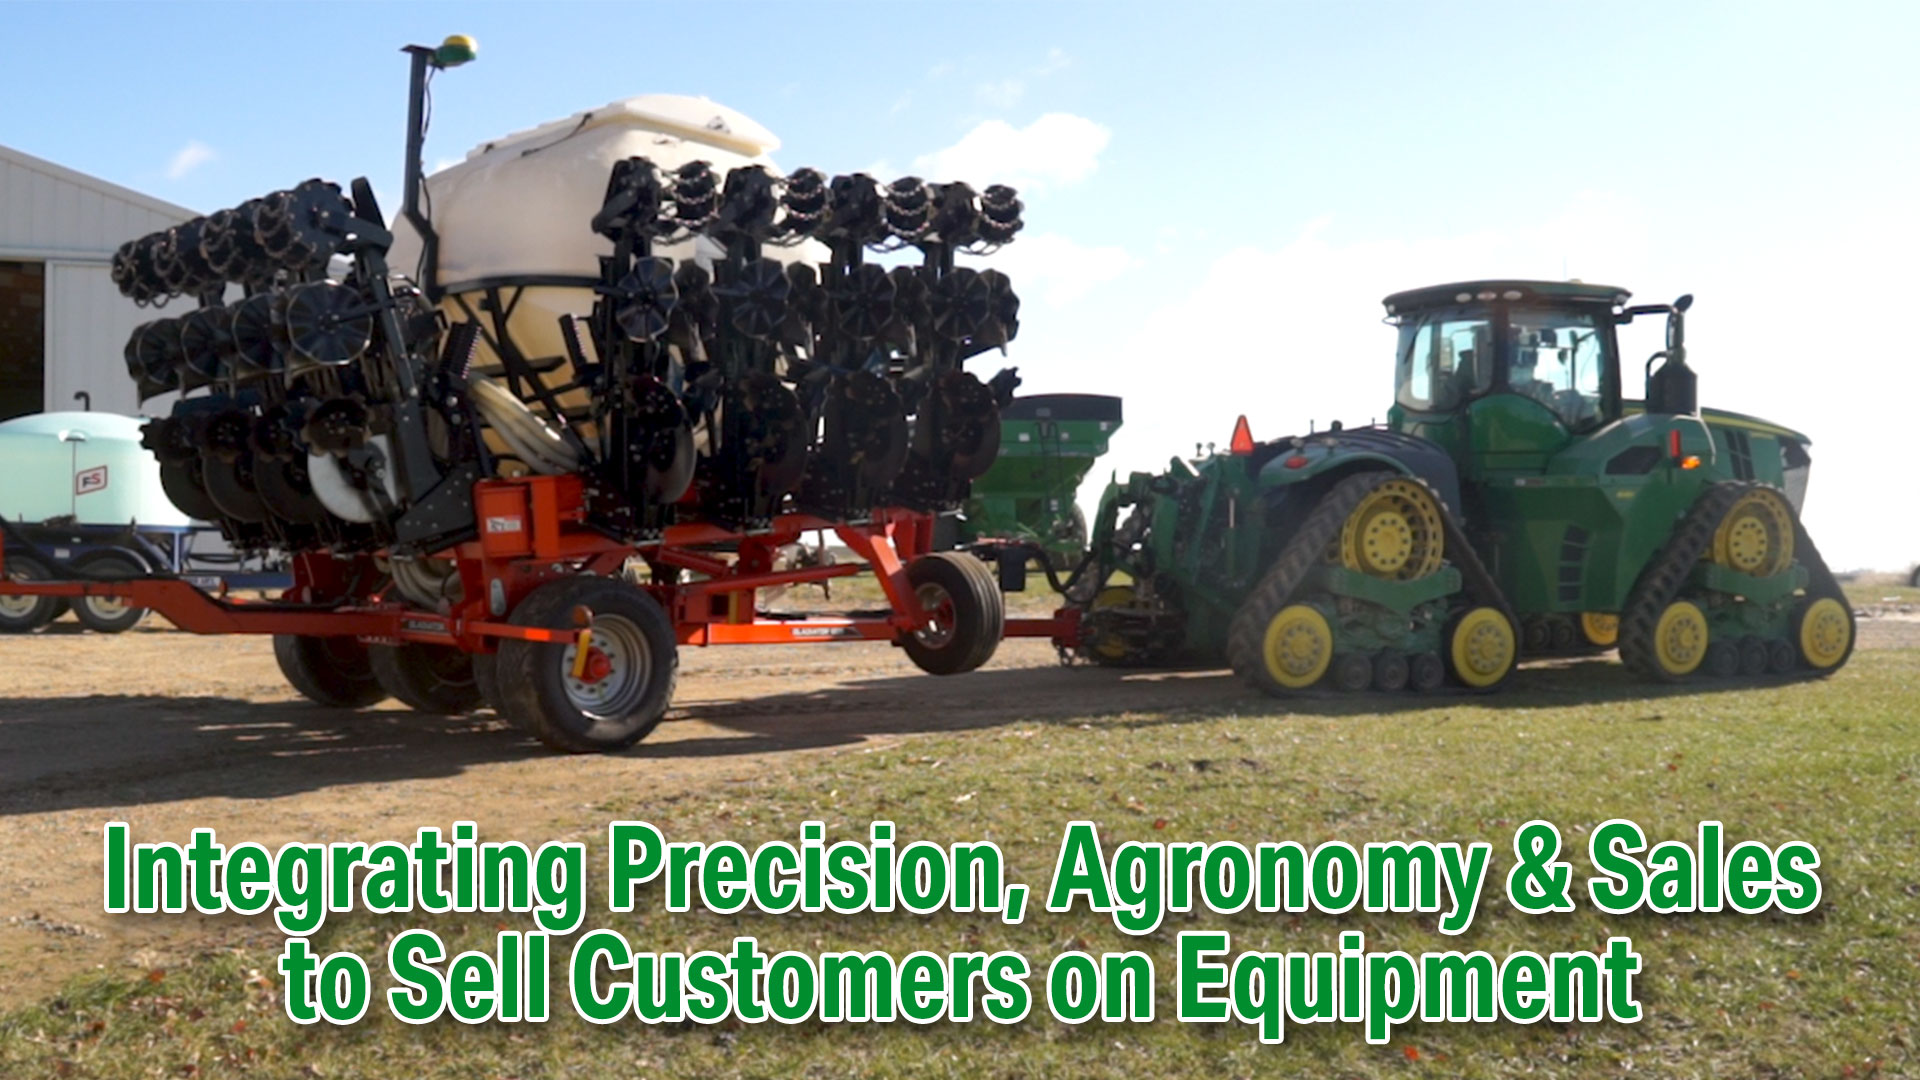 Integrating-Precision-Agronomy--Sales-to-Sell-Customers-on-Equipment.jpg